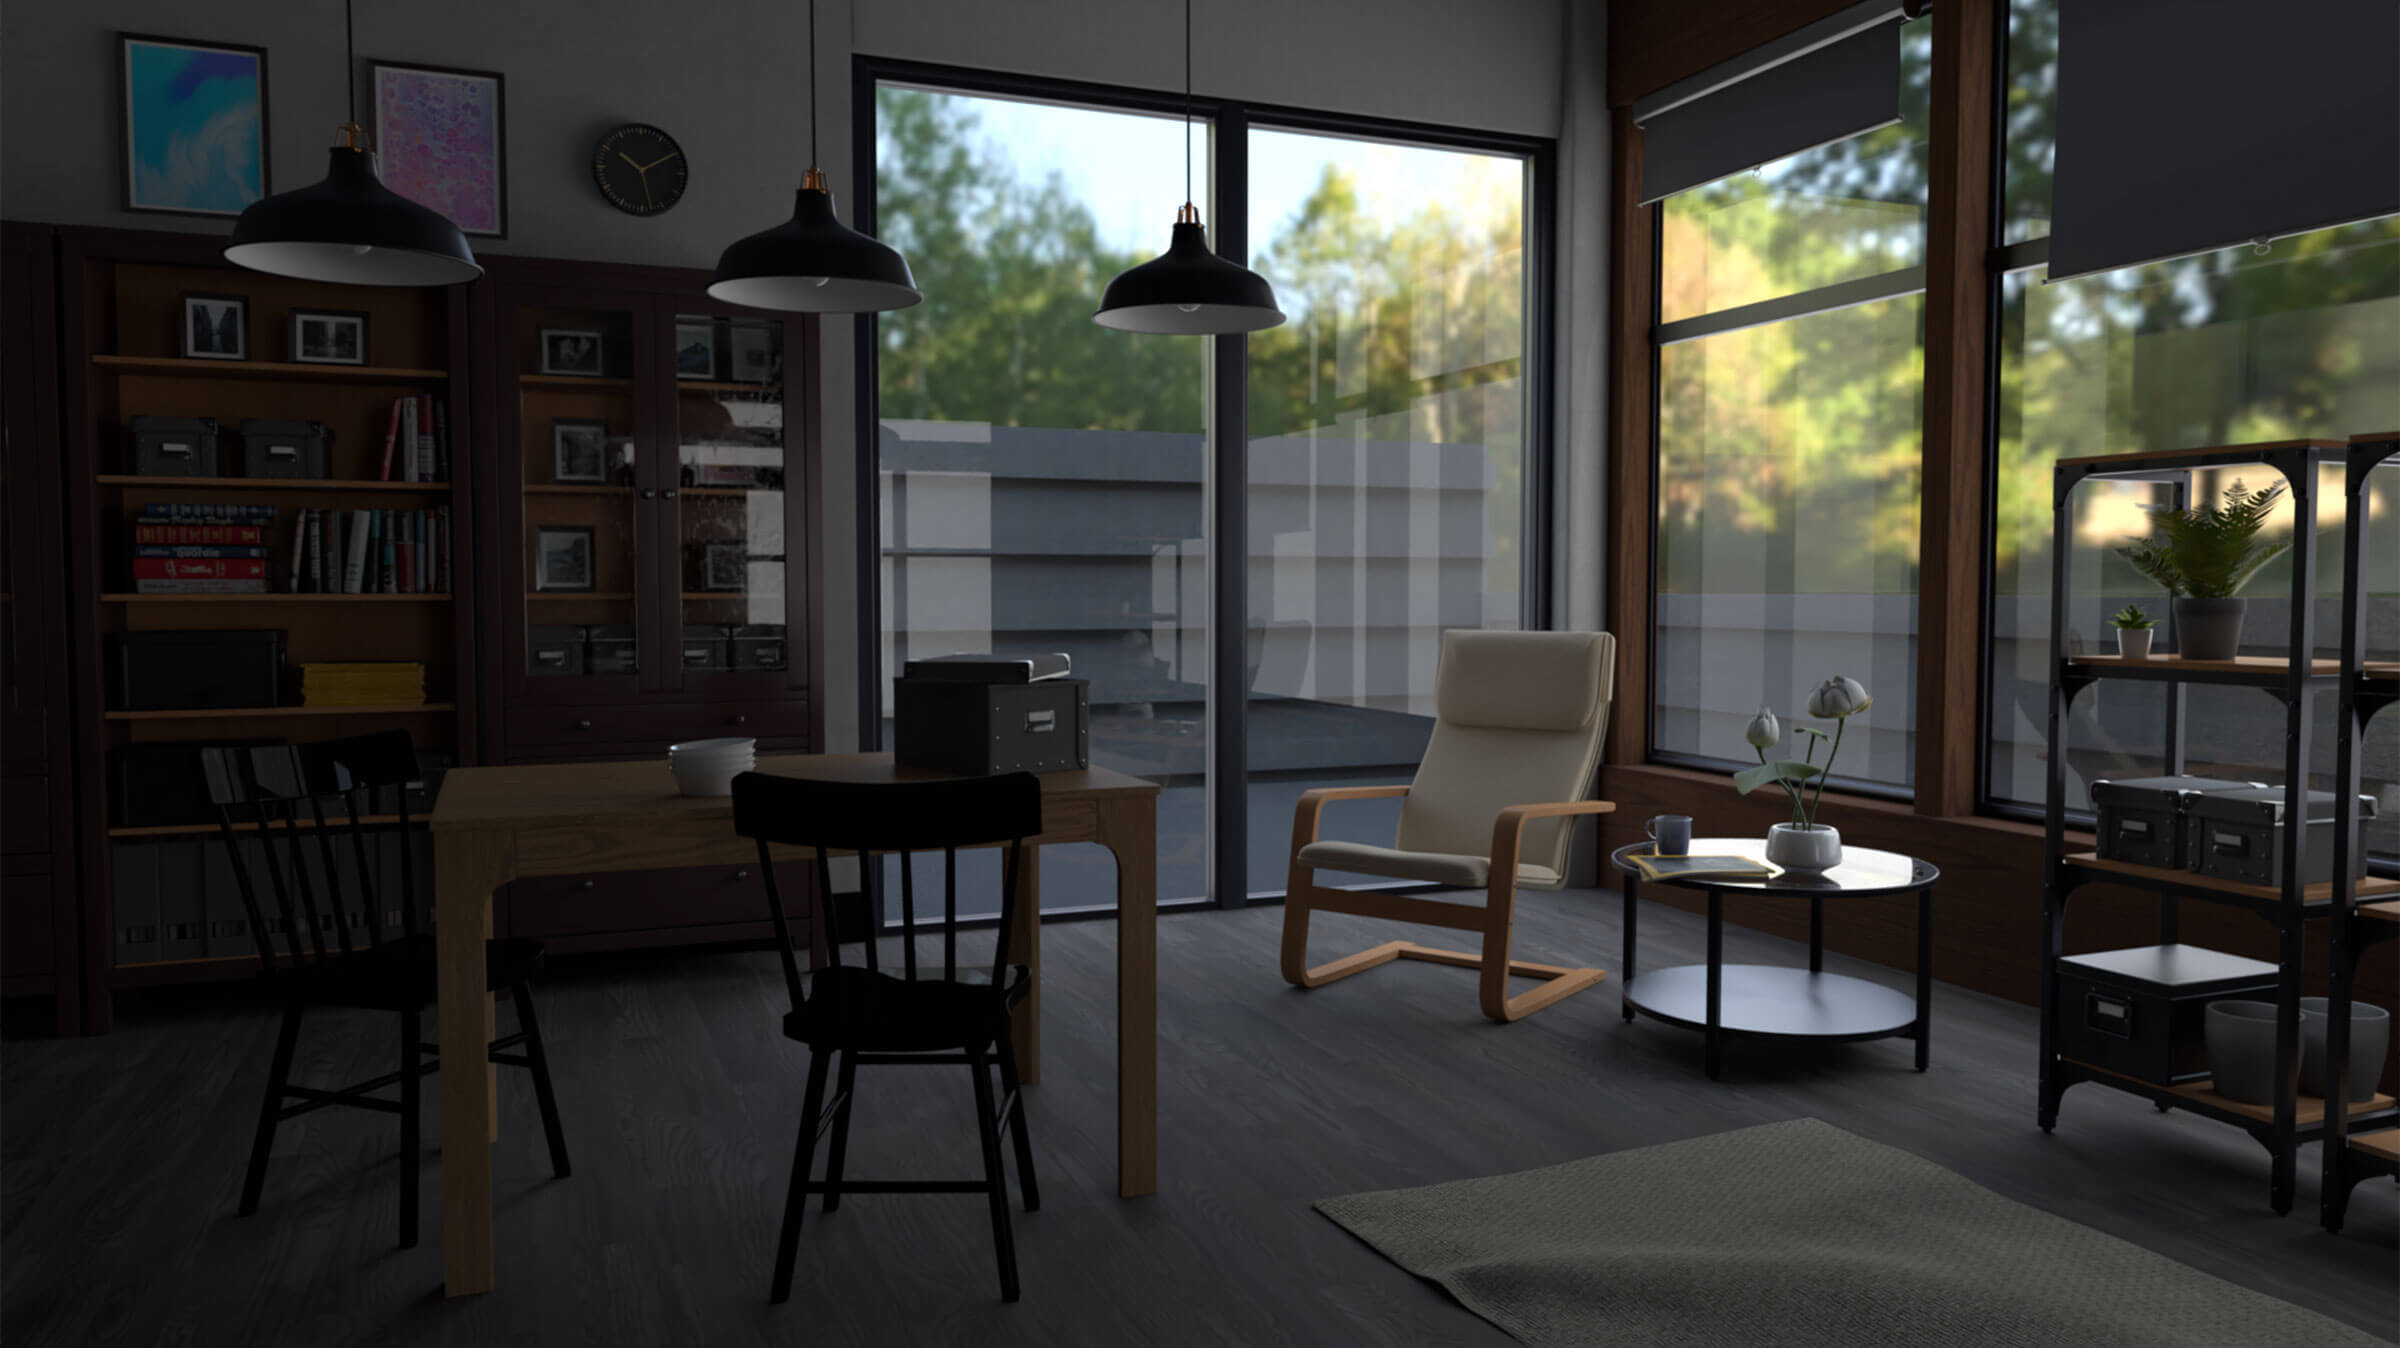 3D-modeled scene of a lounge looking out into a fenced yard.